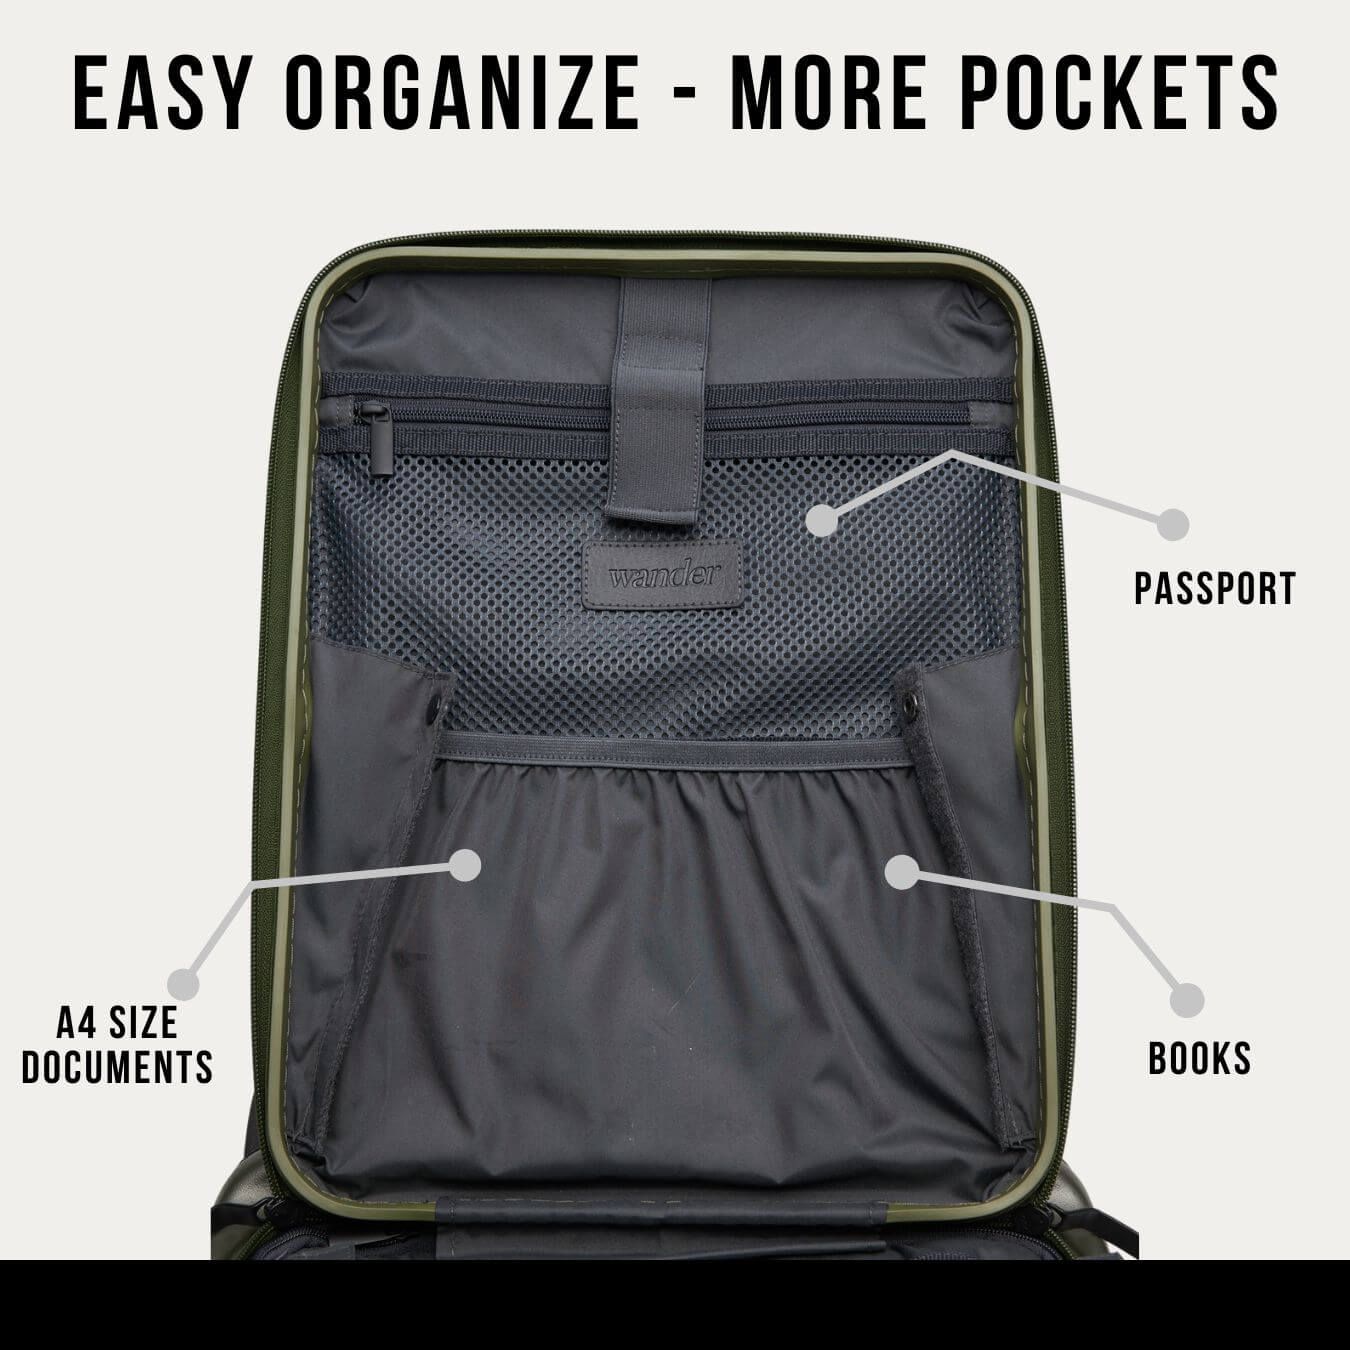 Wander Open Front Luggage - Carry On